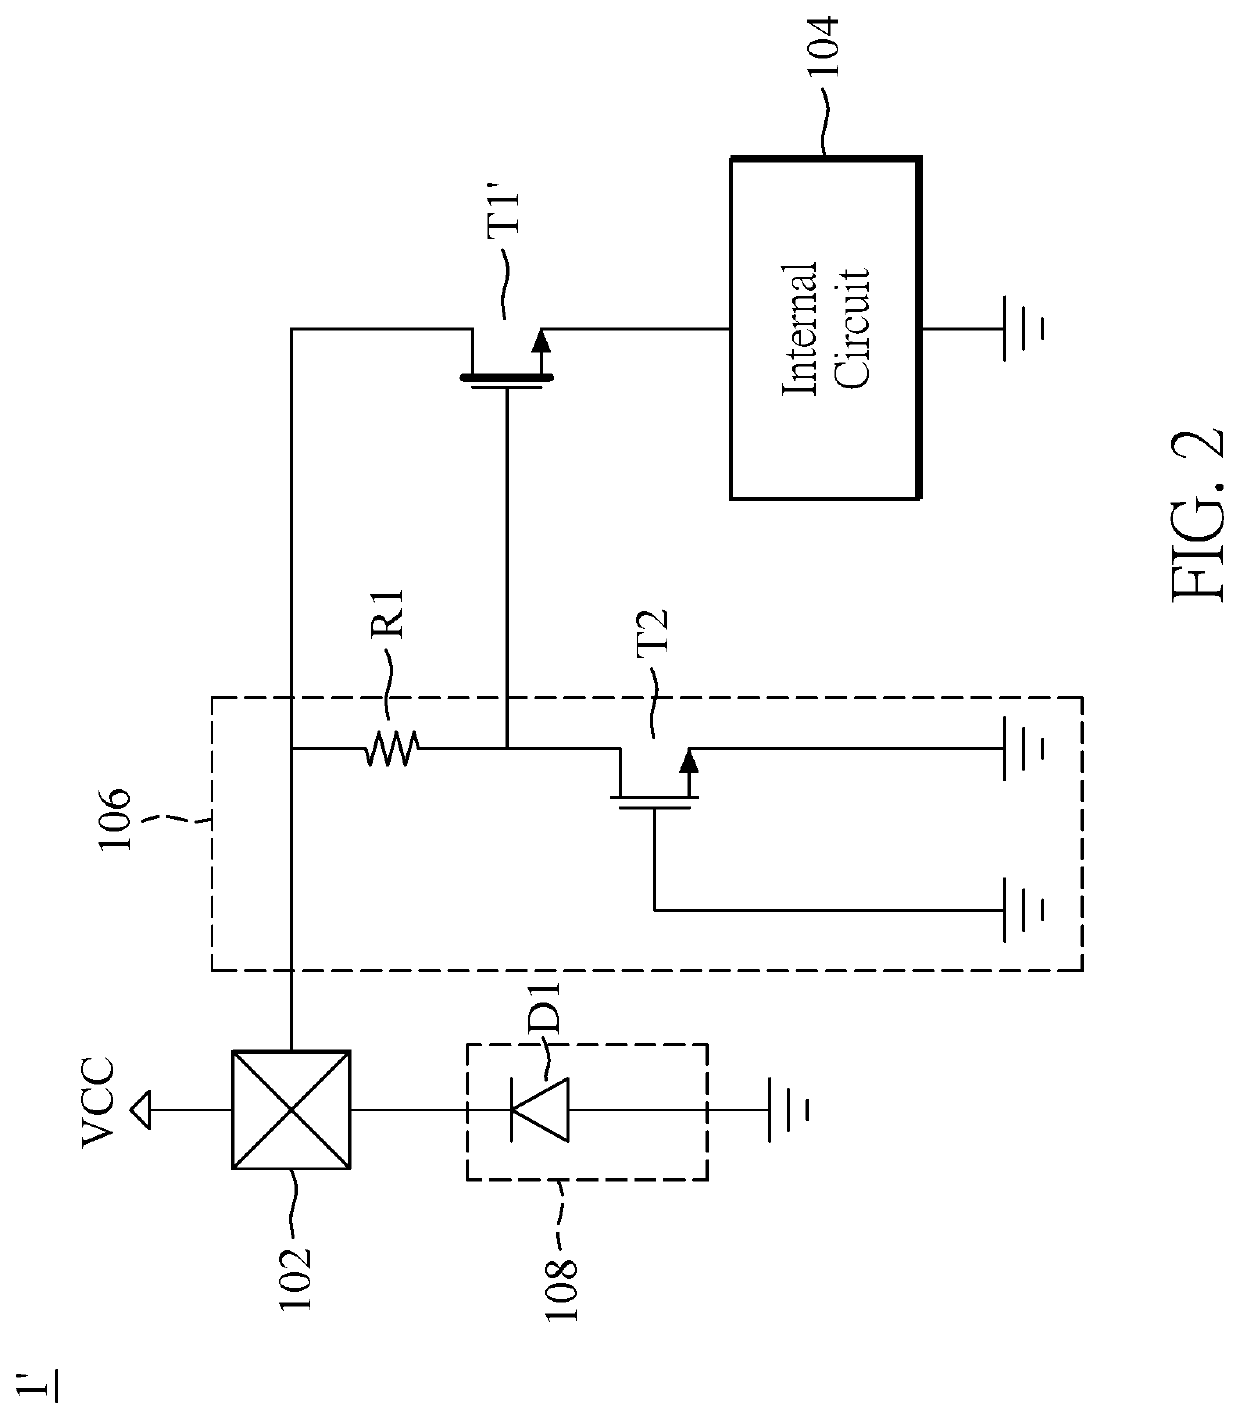 ESD protection circuit